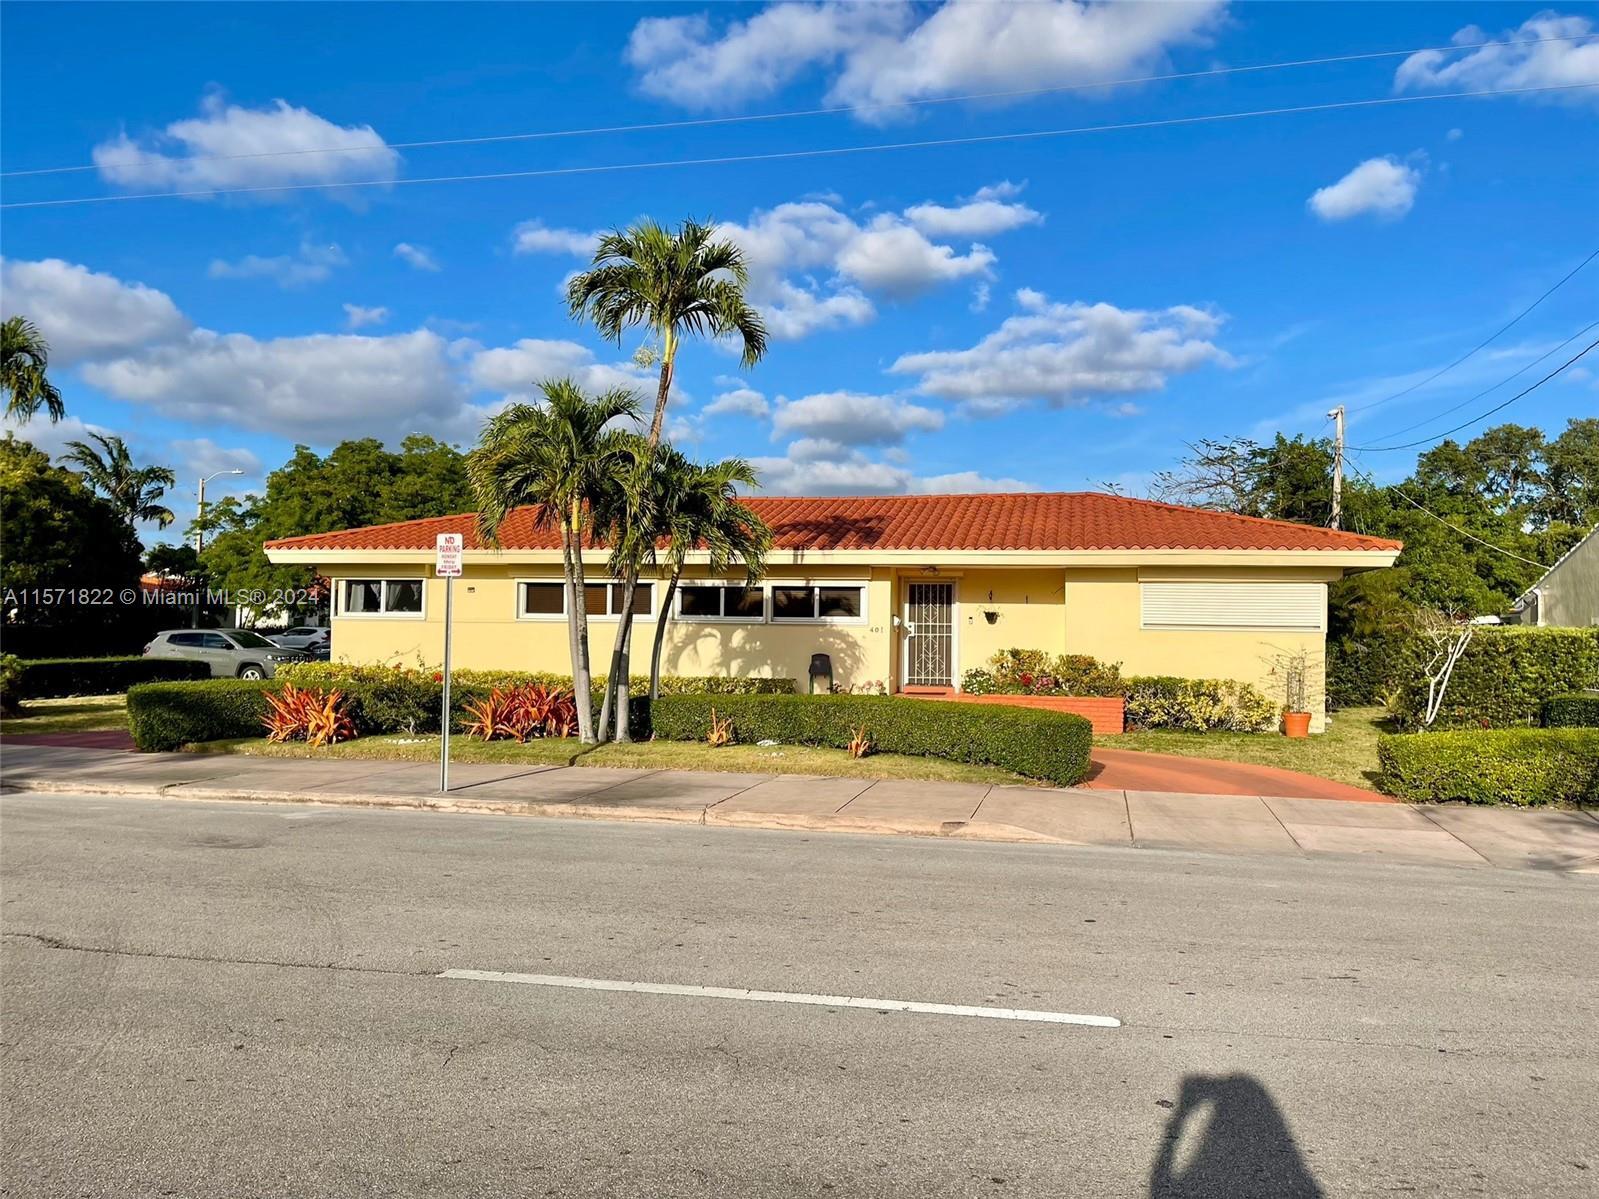 Charming 2BD/1.5BA gem in Coral Gables! Excellent condition and prime location near Downtown Coral G